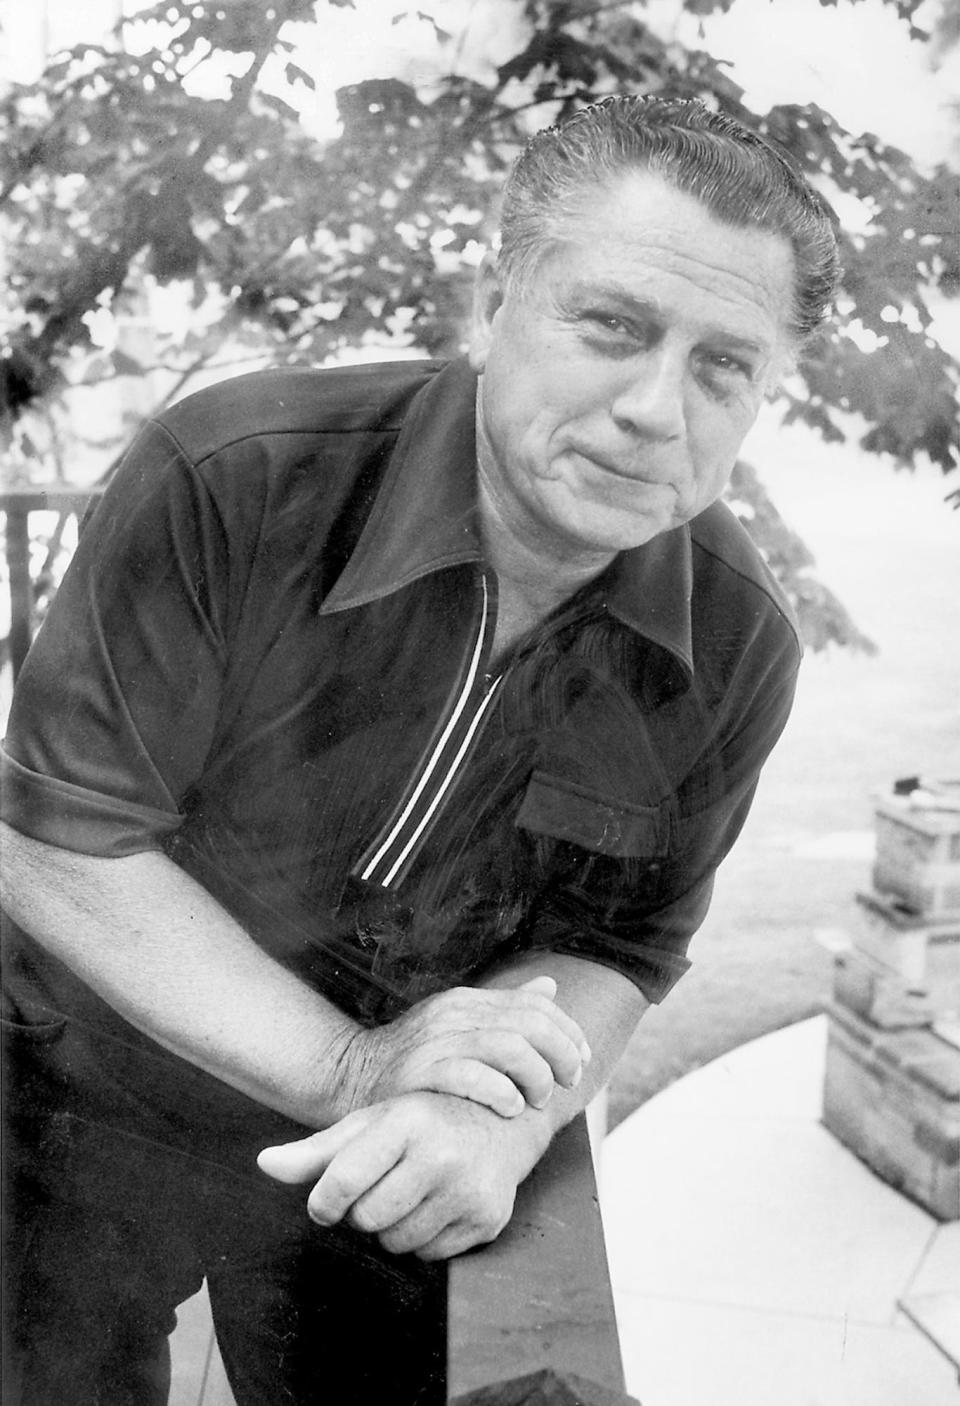 Jimmy Hoffa on July 24, 1975, days before his disappearance.